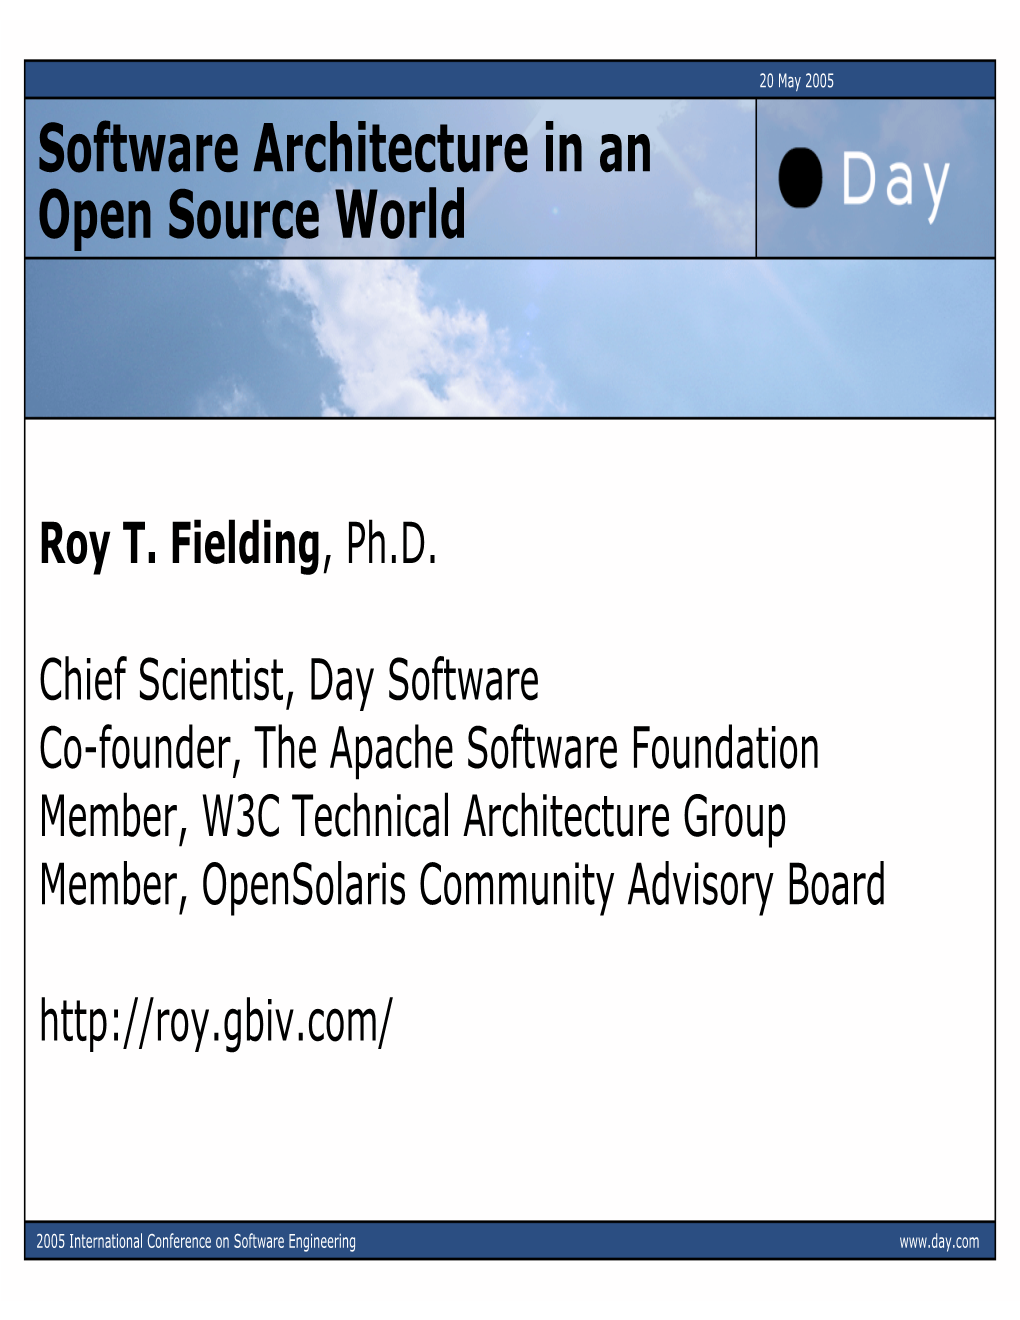 Software Architecture in an Open Source World